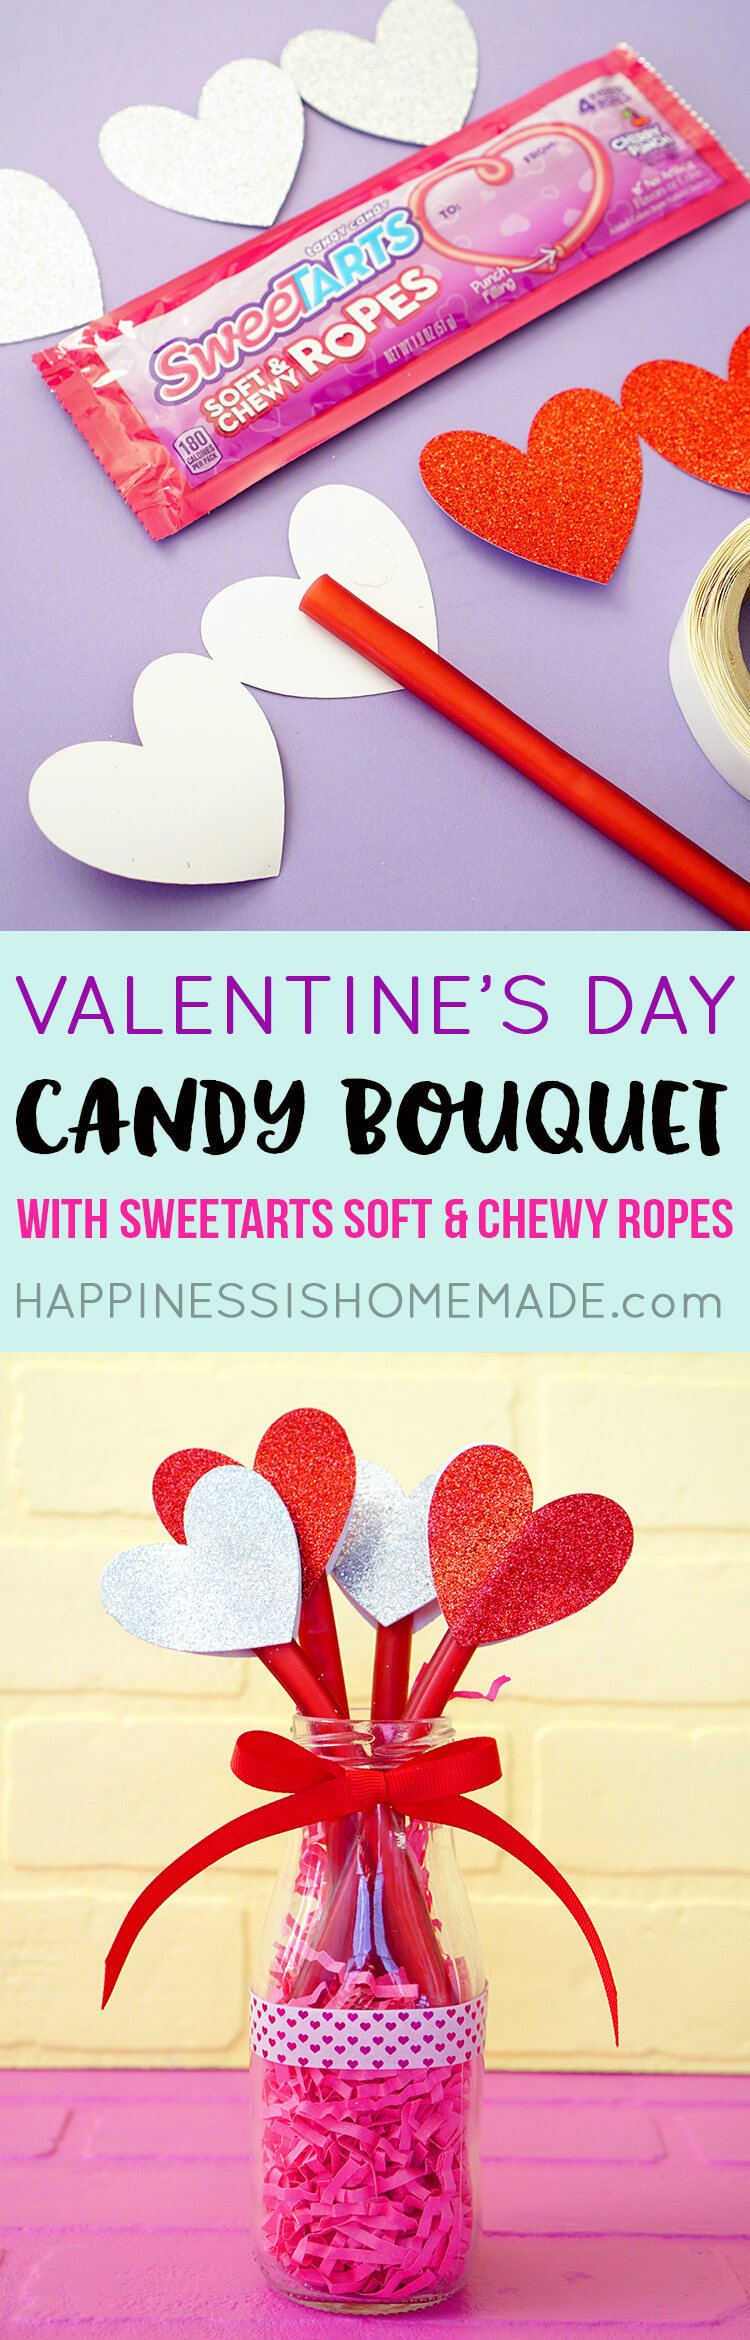 valentine's day donuts & candy bouquet gift idea - happiness is homemade